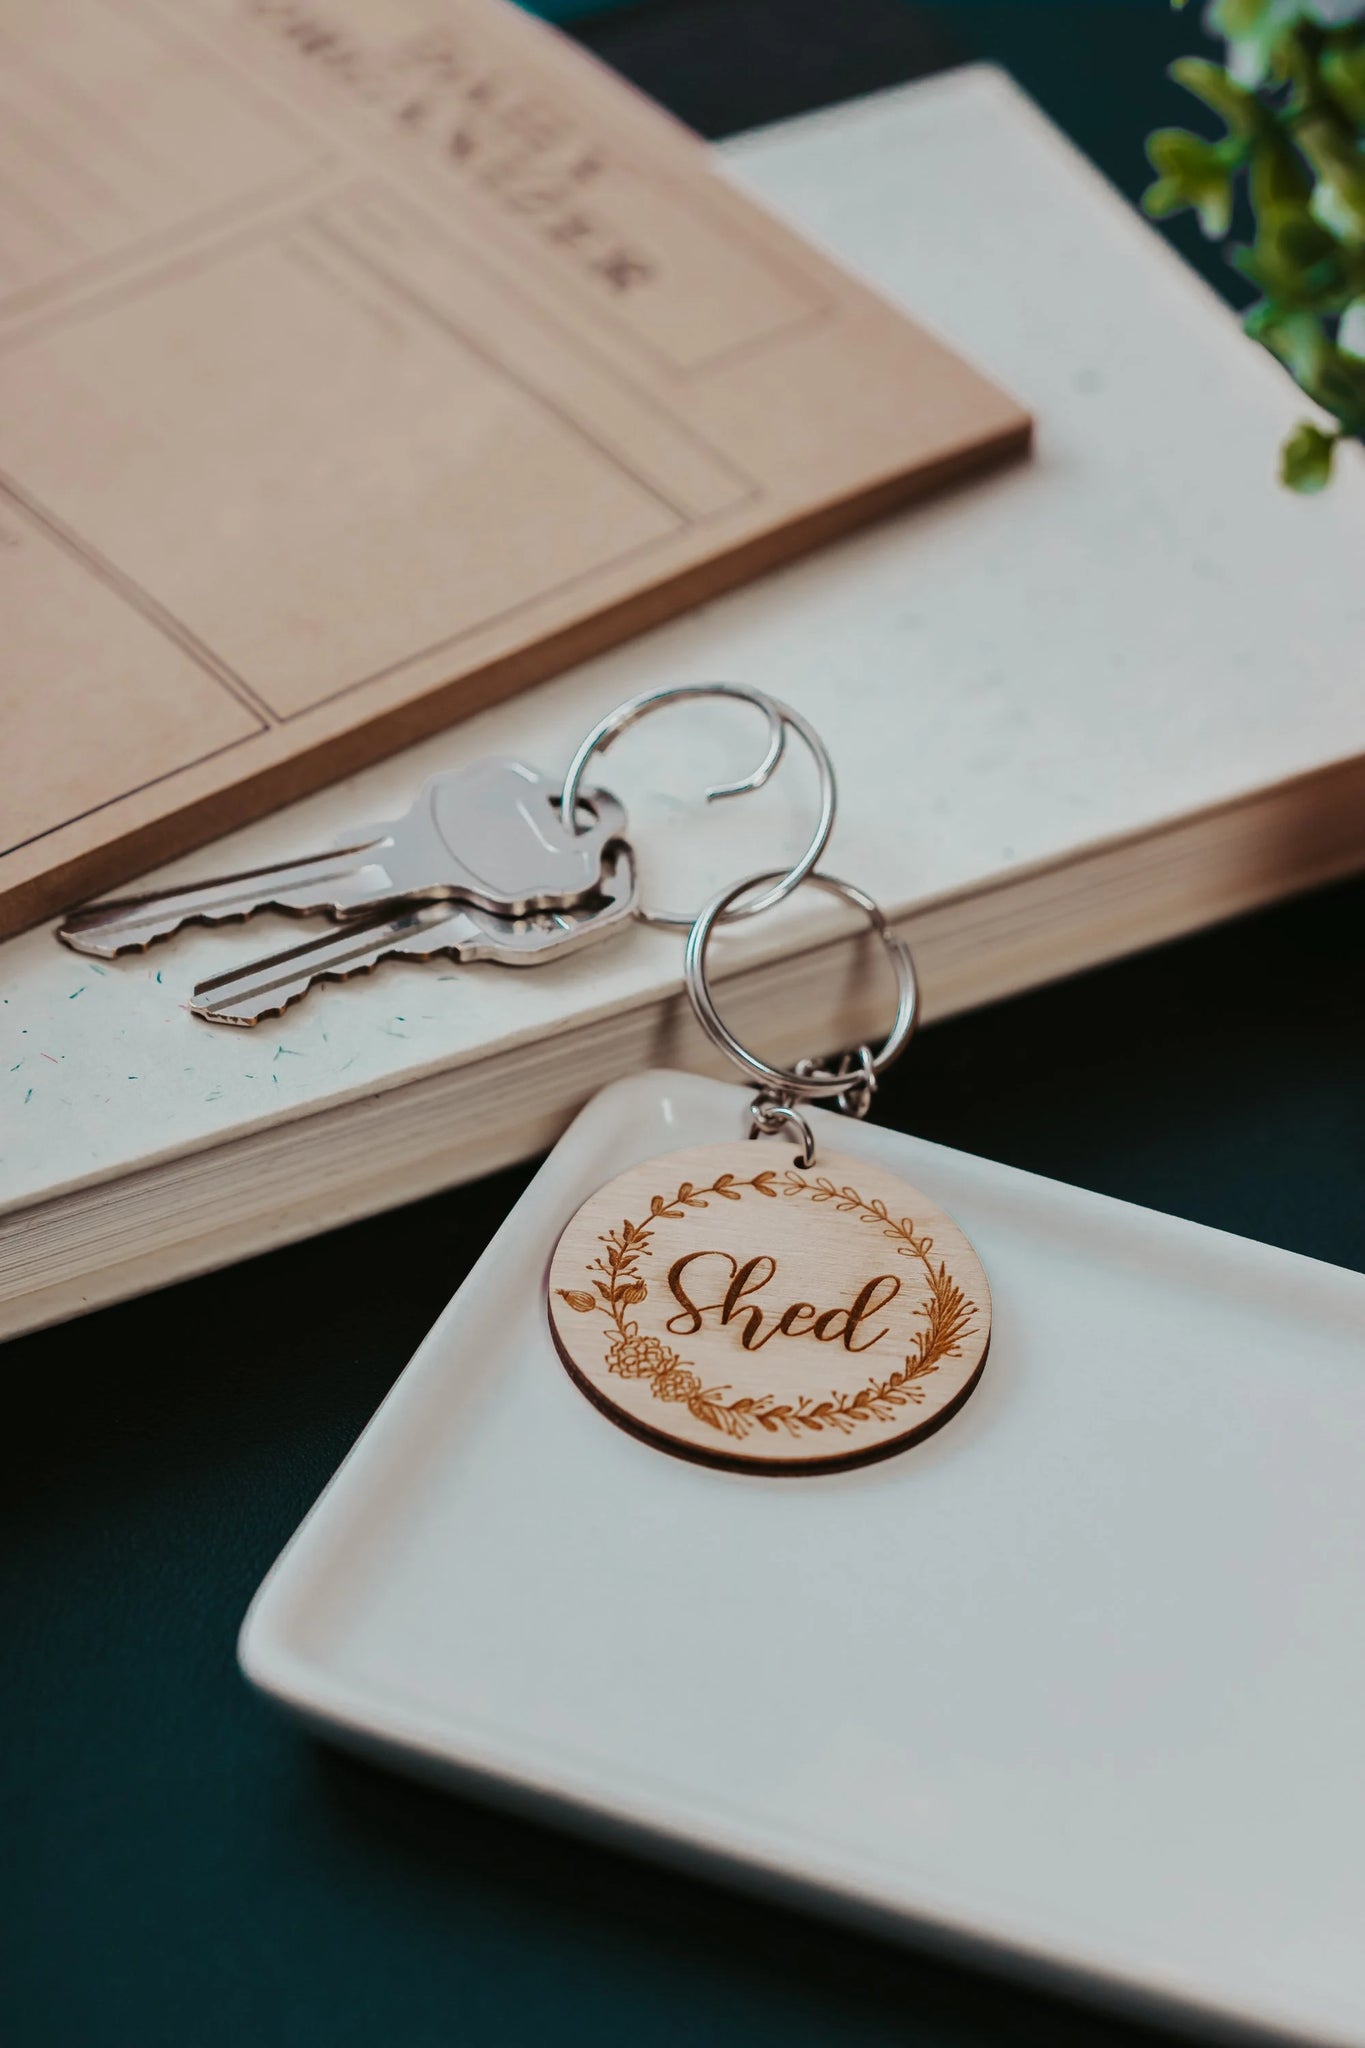 Floral Shed Keychain Gift For Her, Mom Boss Work She Shed Key Fob Christmas Gift For Boss Lady